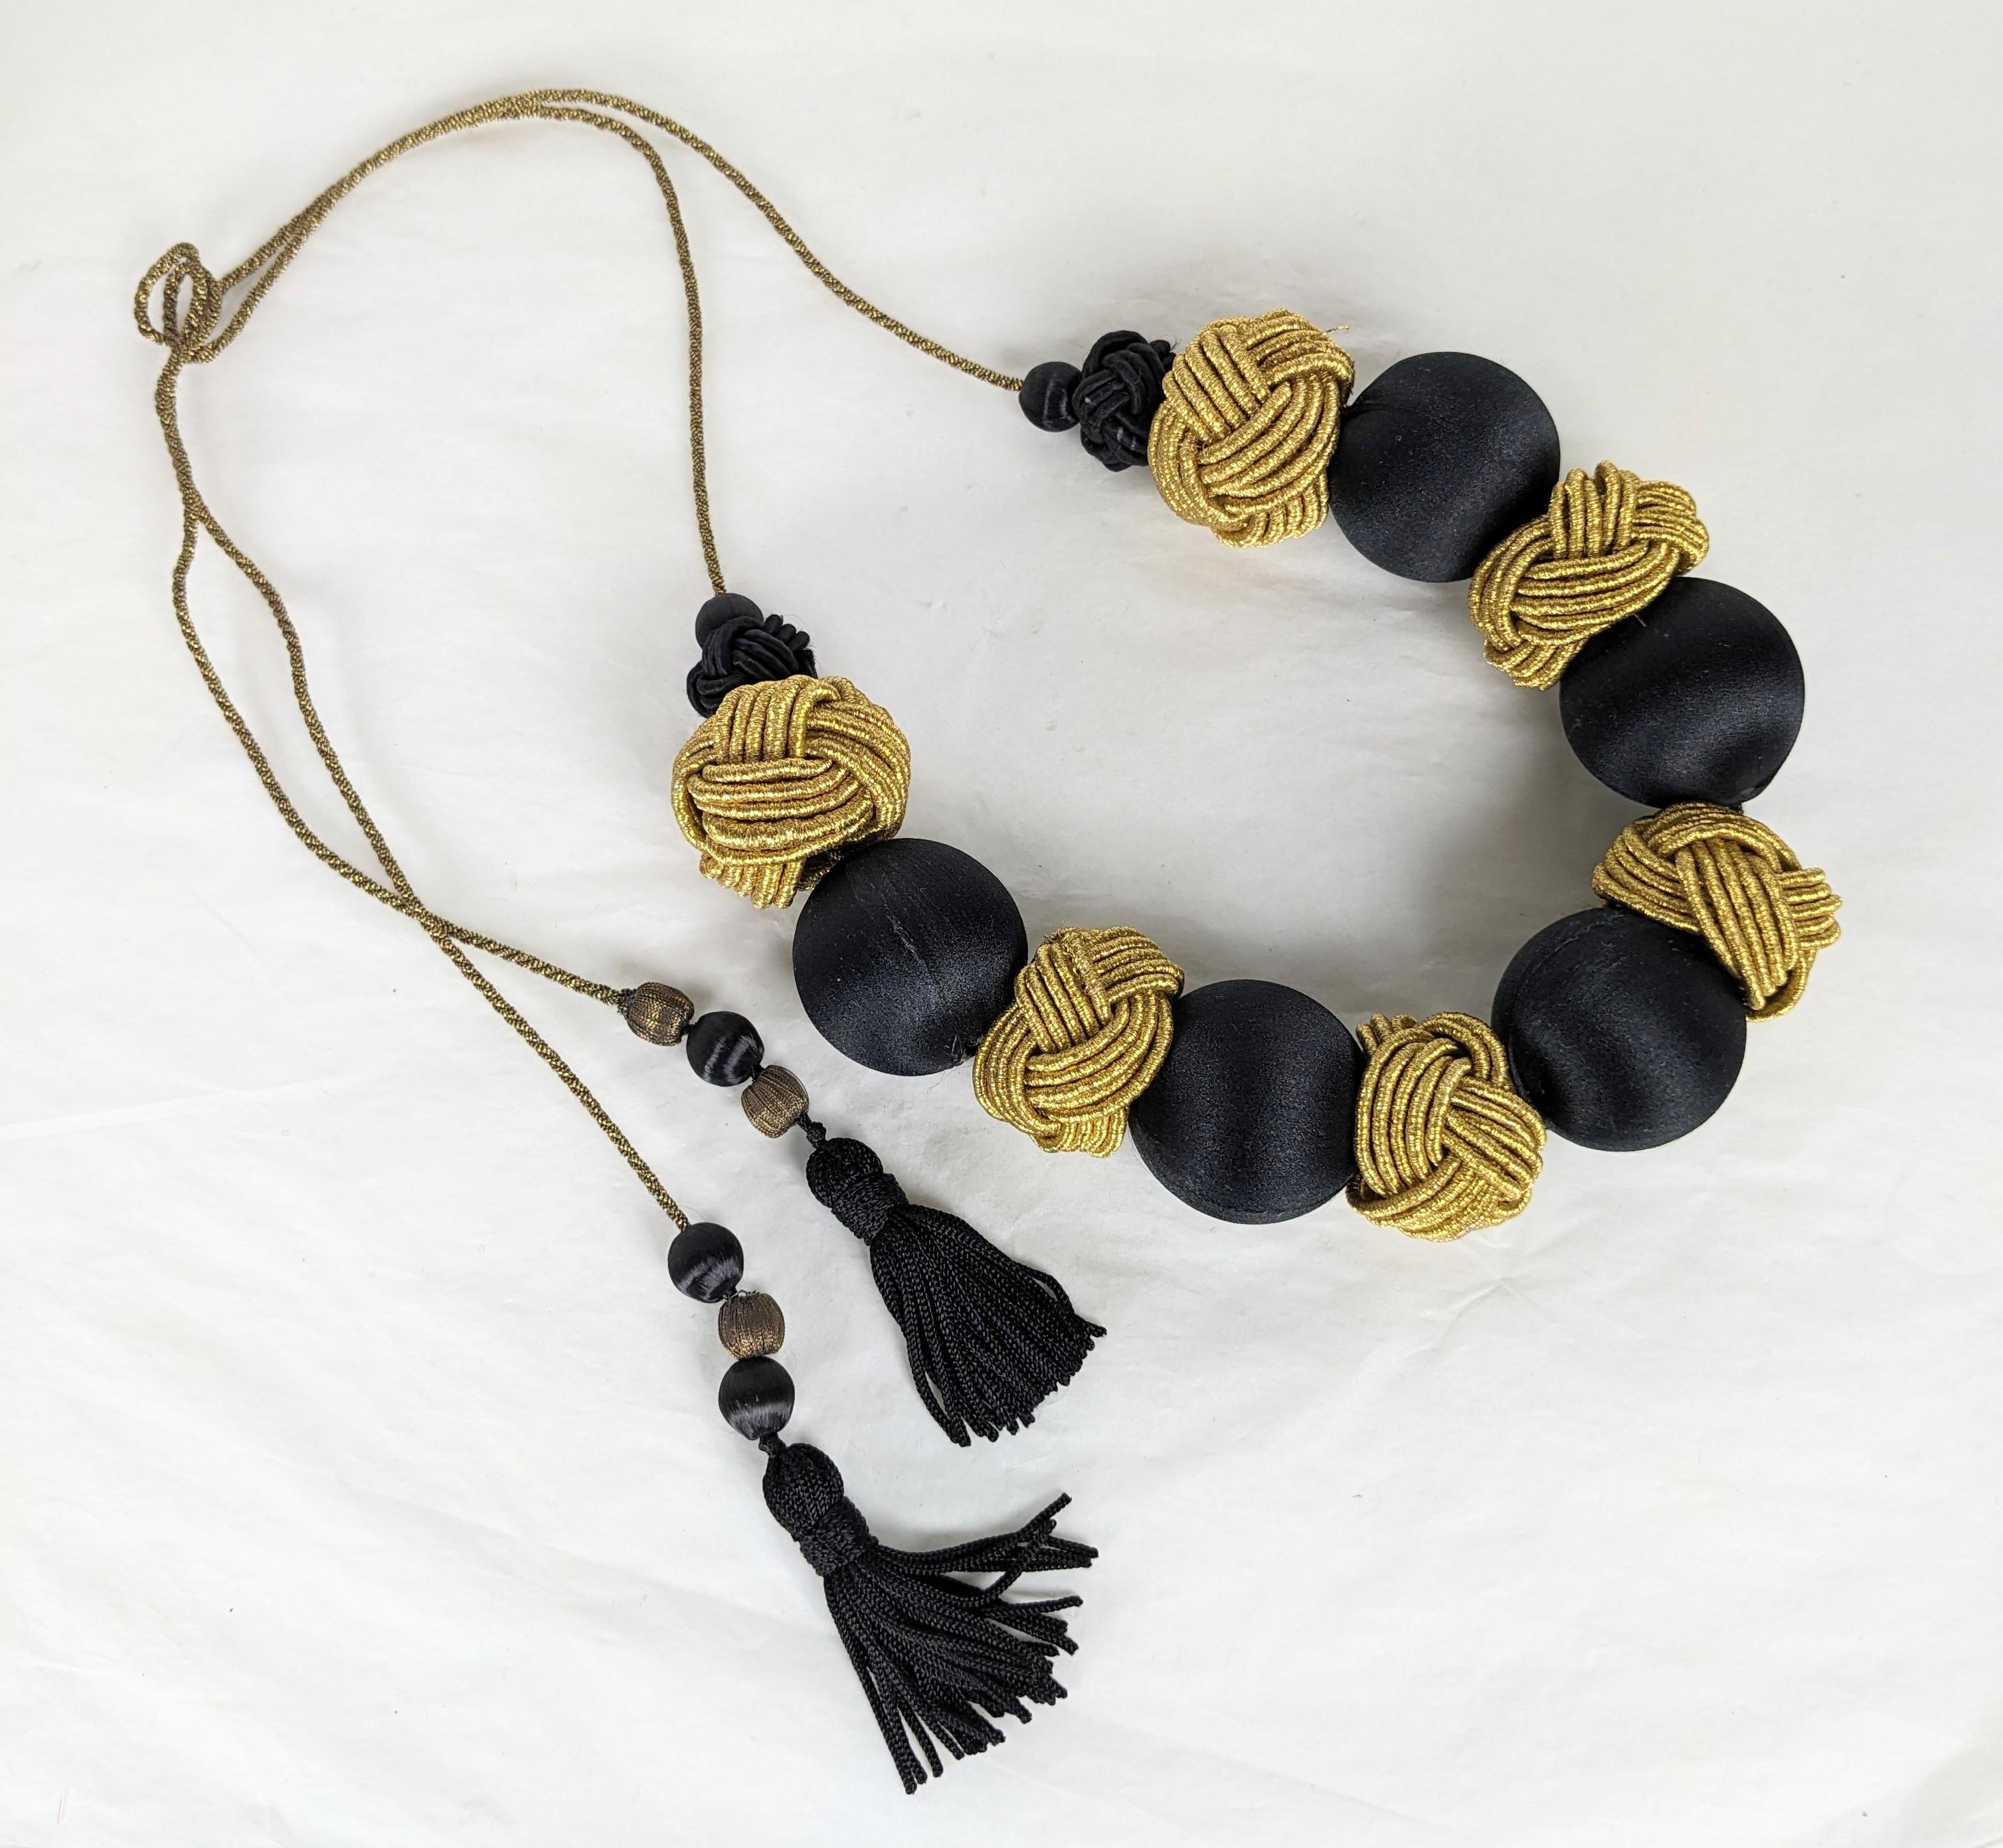 Yves Saint Laurent Passementerie Necklace, Haute Couture Fall/Winter 1977 Chinese Opium Collection. Composed of silk cord with tassel ends. Gilt chinese passementerie knots, silk sateen large and small beads imitating  black onyx. Excellent